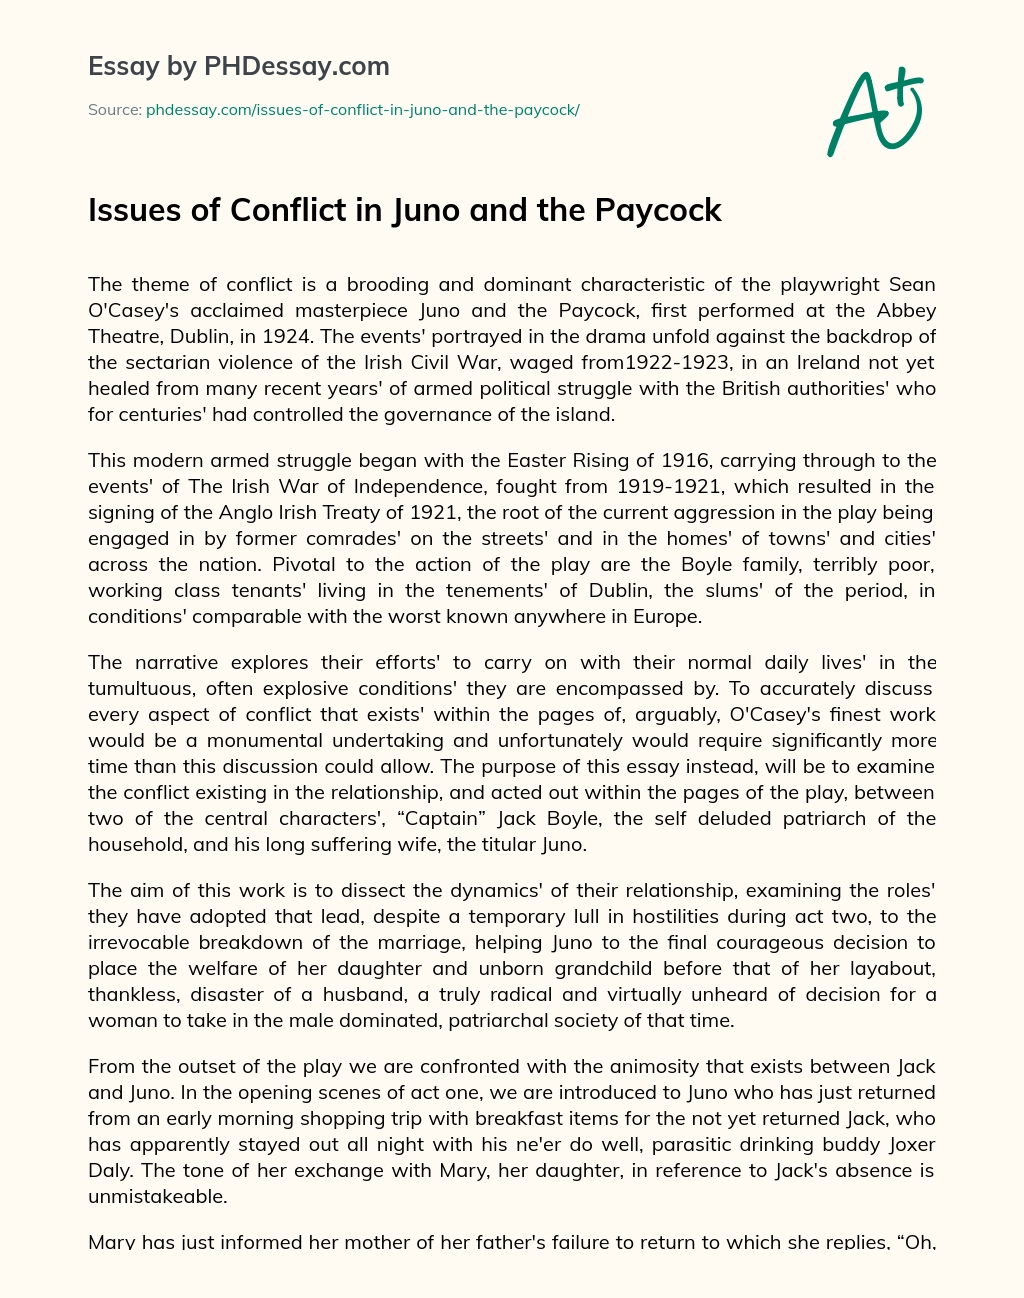 Issues of Conflict in Juno and the Paycock essay